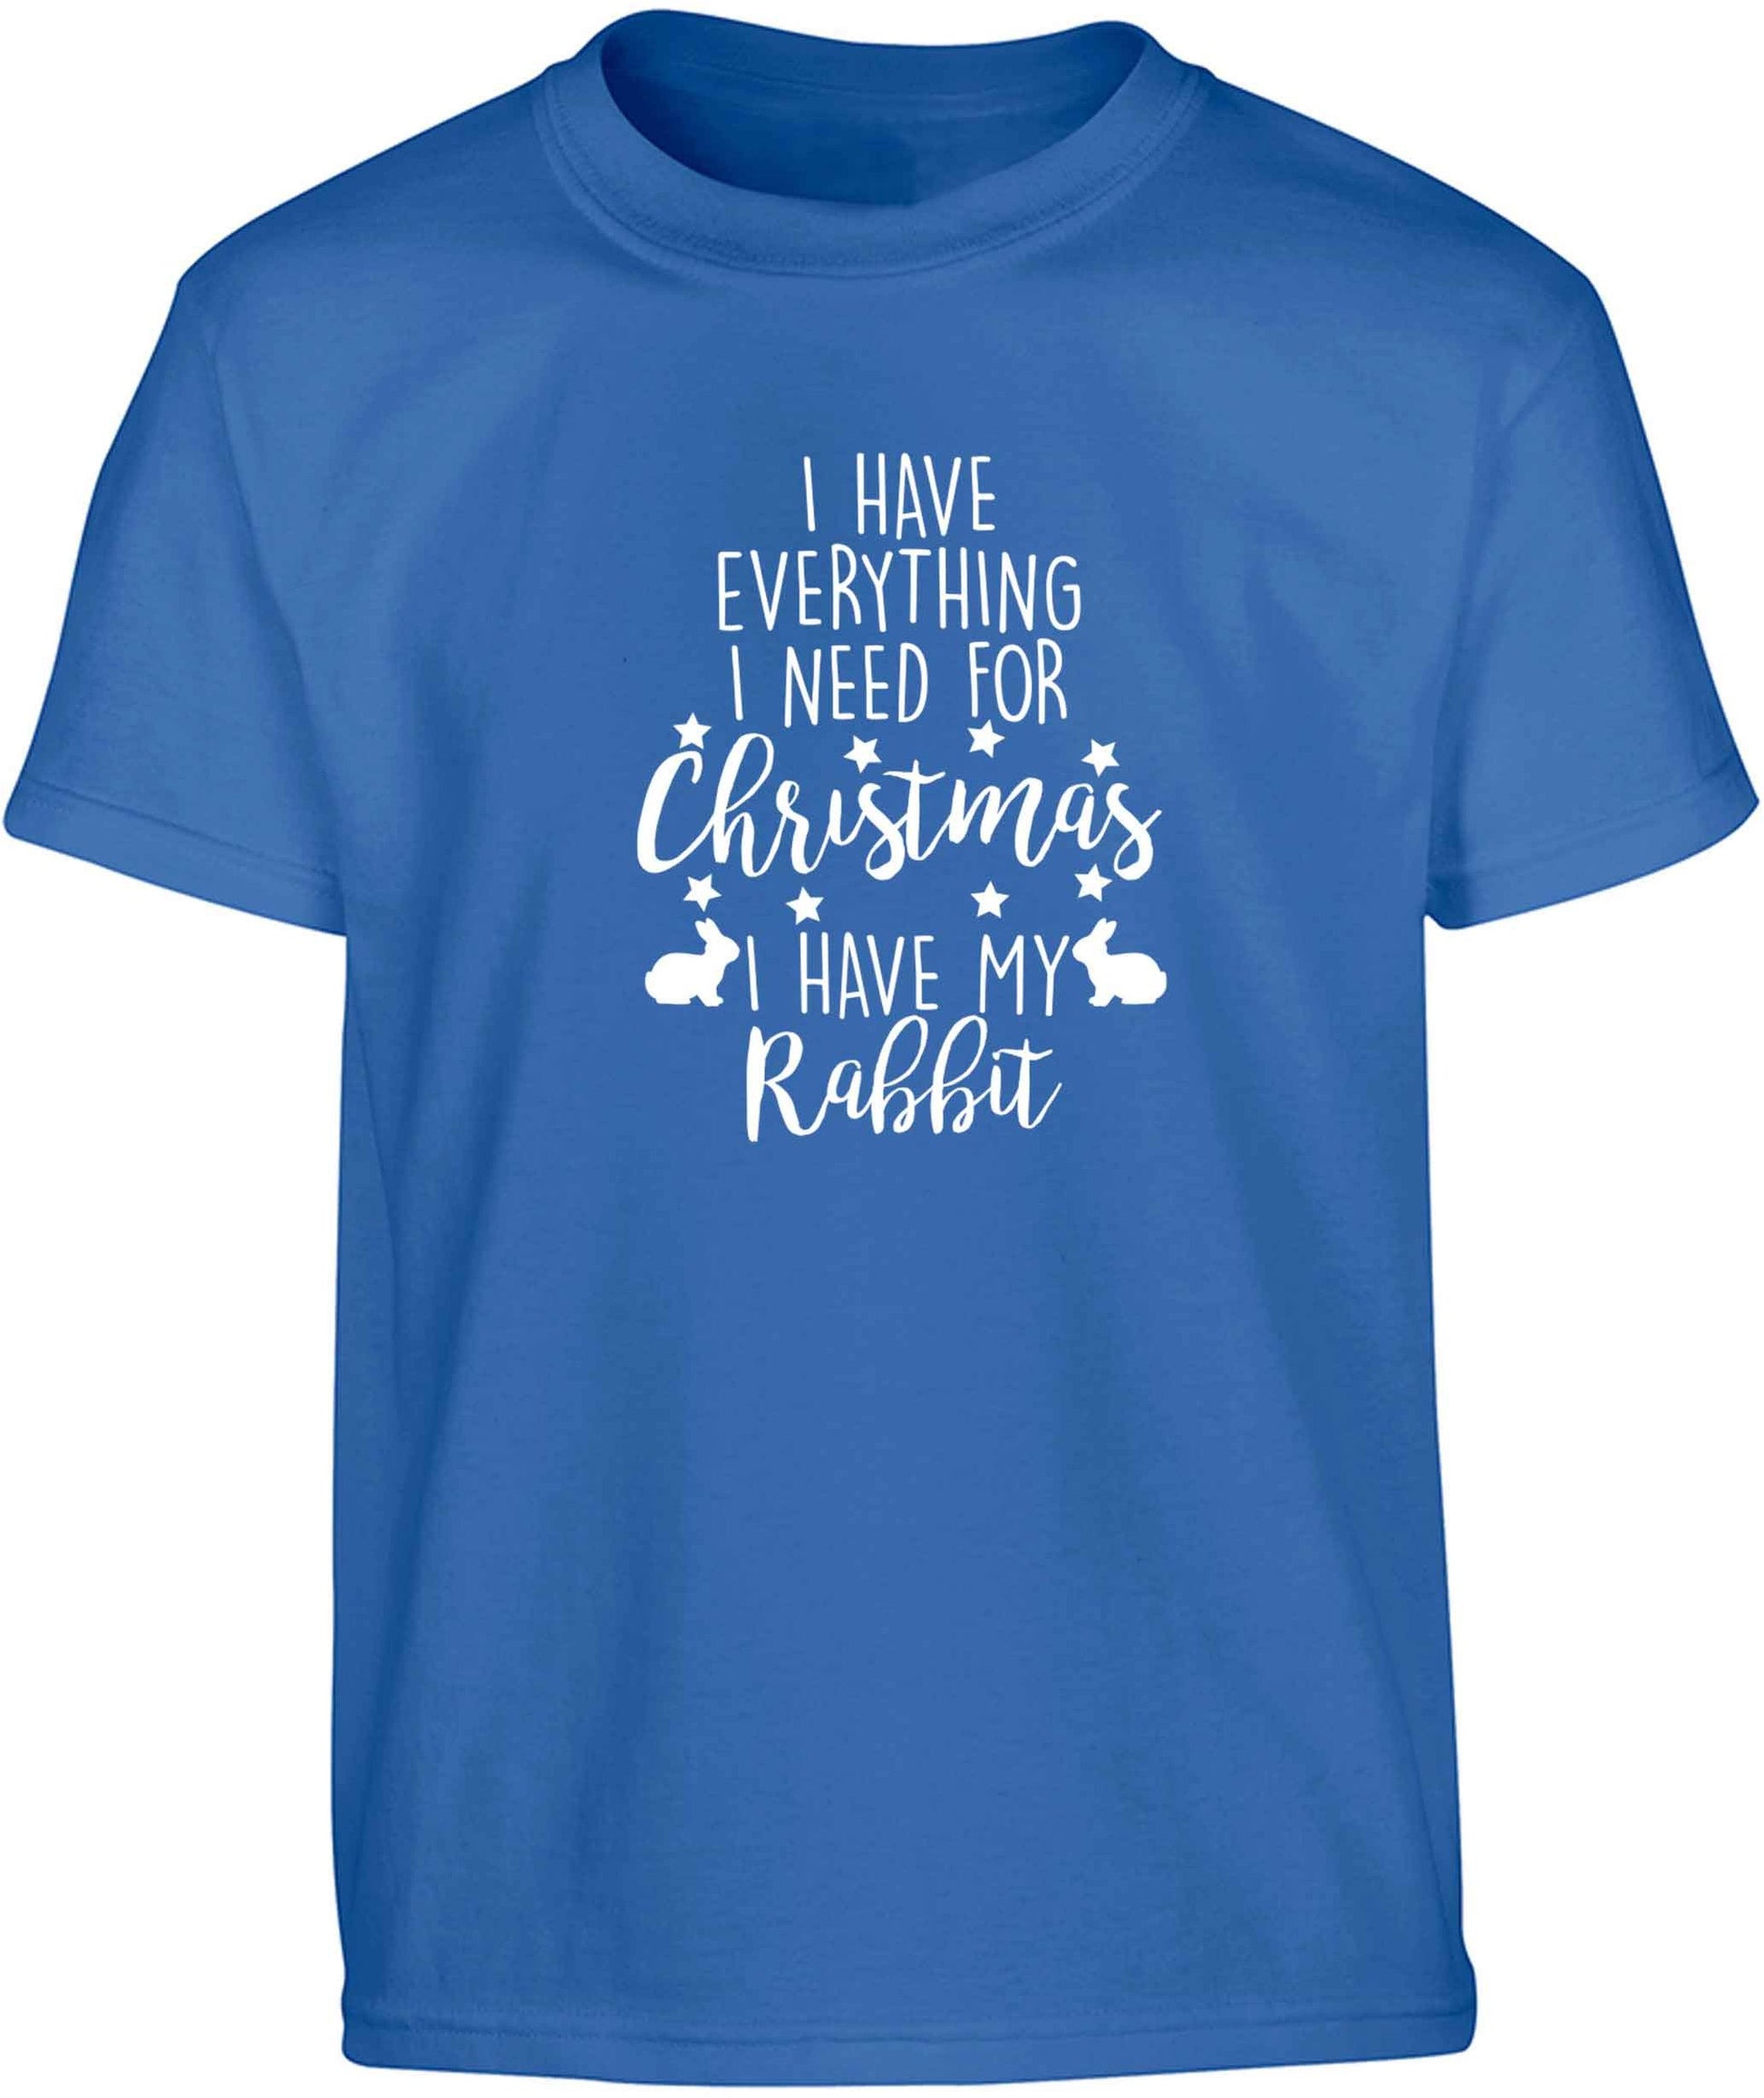 I have everything I need for Christmas I have my rabbit Children's blue Tshirt 12-13 Years